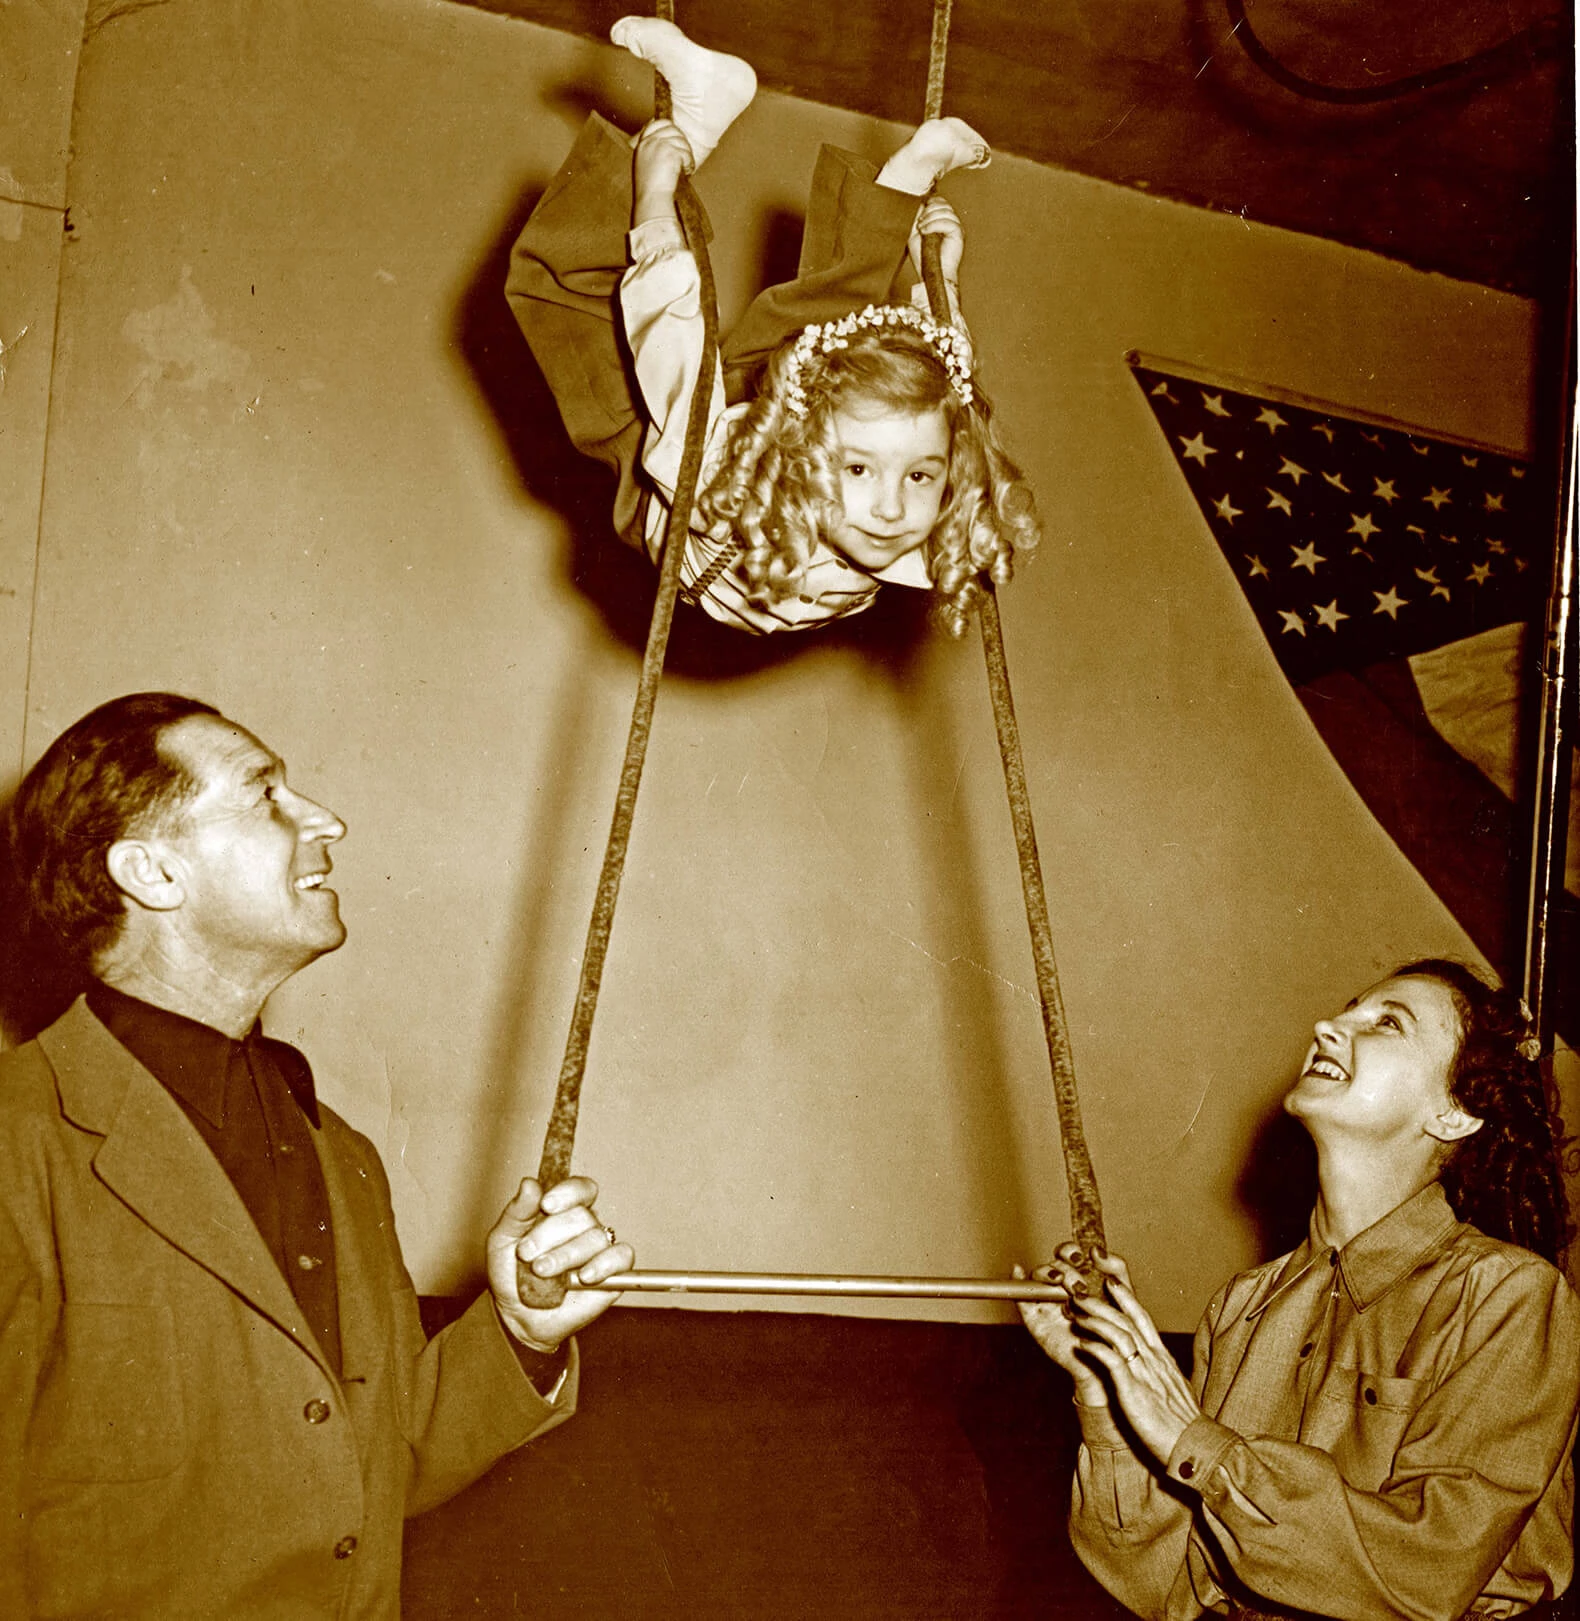 A young girl is holding on two ropes of a trapese, but she is high above the trapese bar. Her feet are above her head and she looks forward with a smile. She has chin-length curly light colored hair and is wearing regular clothes. Her parents are holding the trapese bar, looking up to her, and smiling.